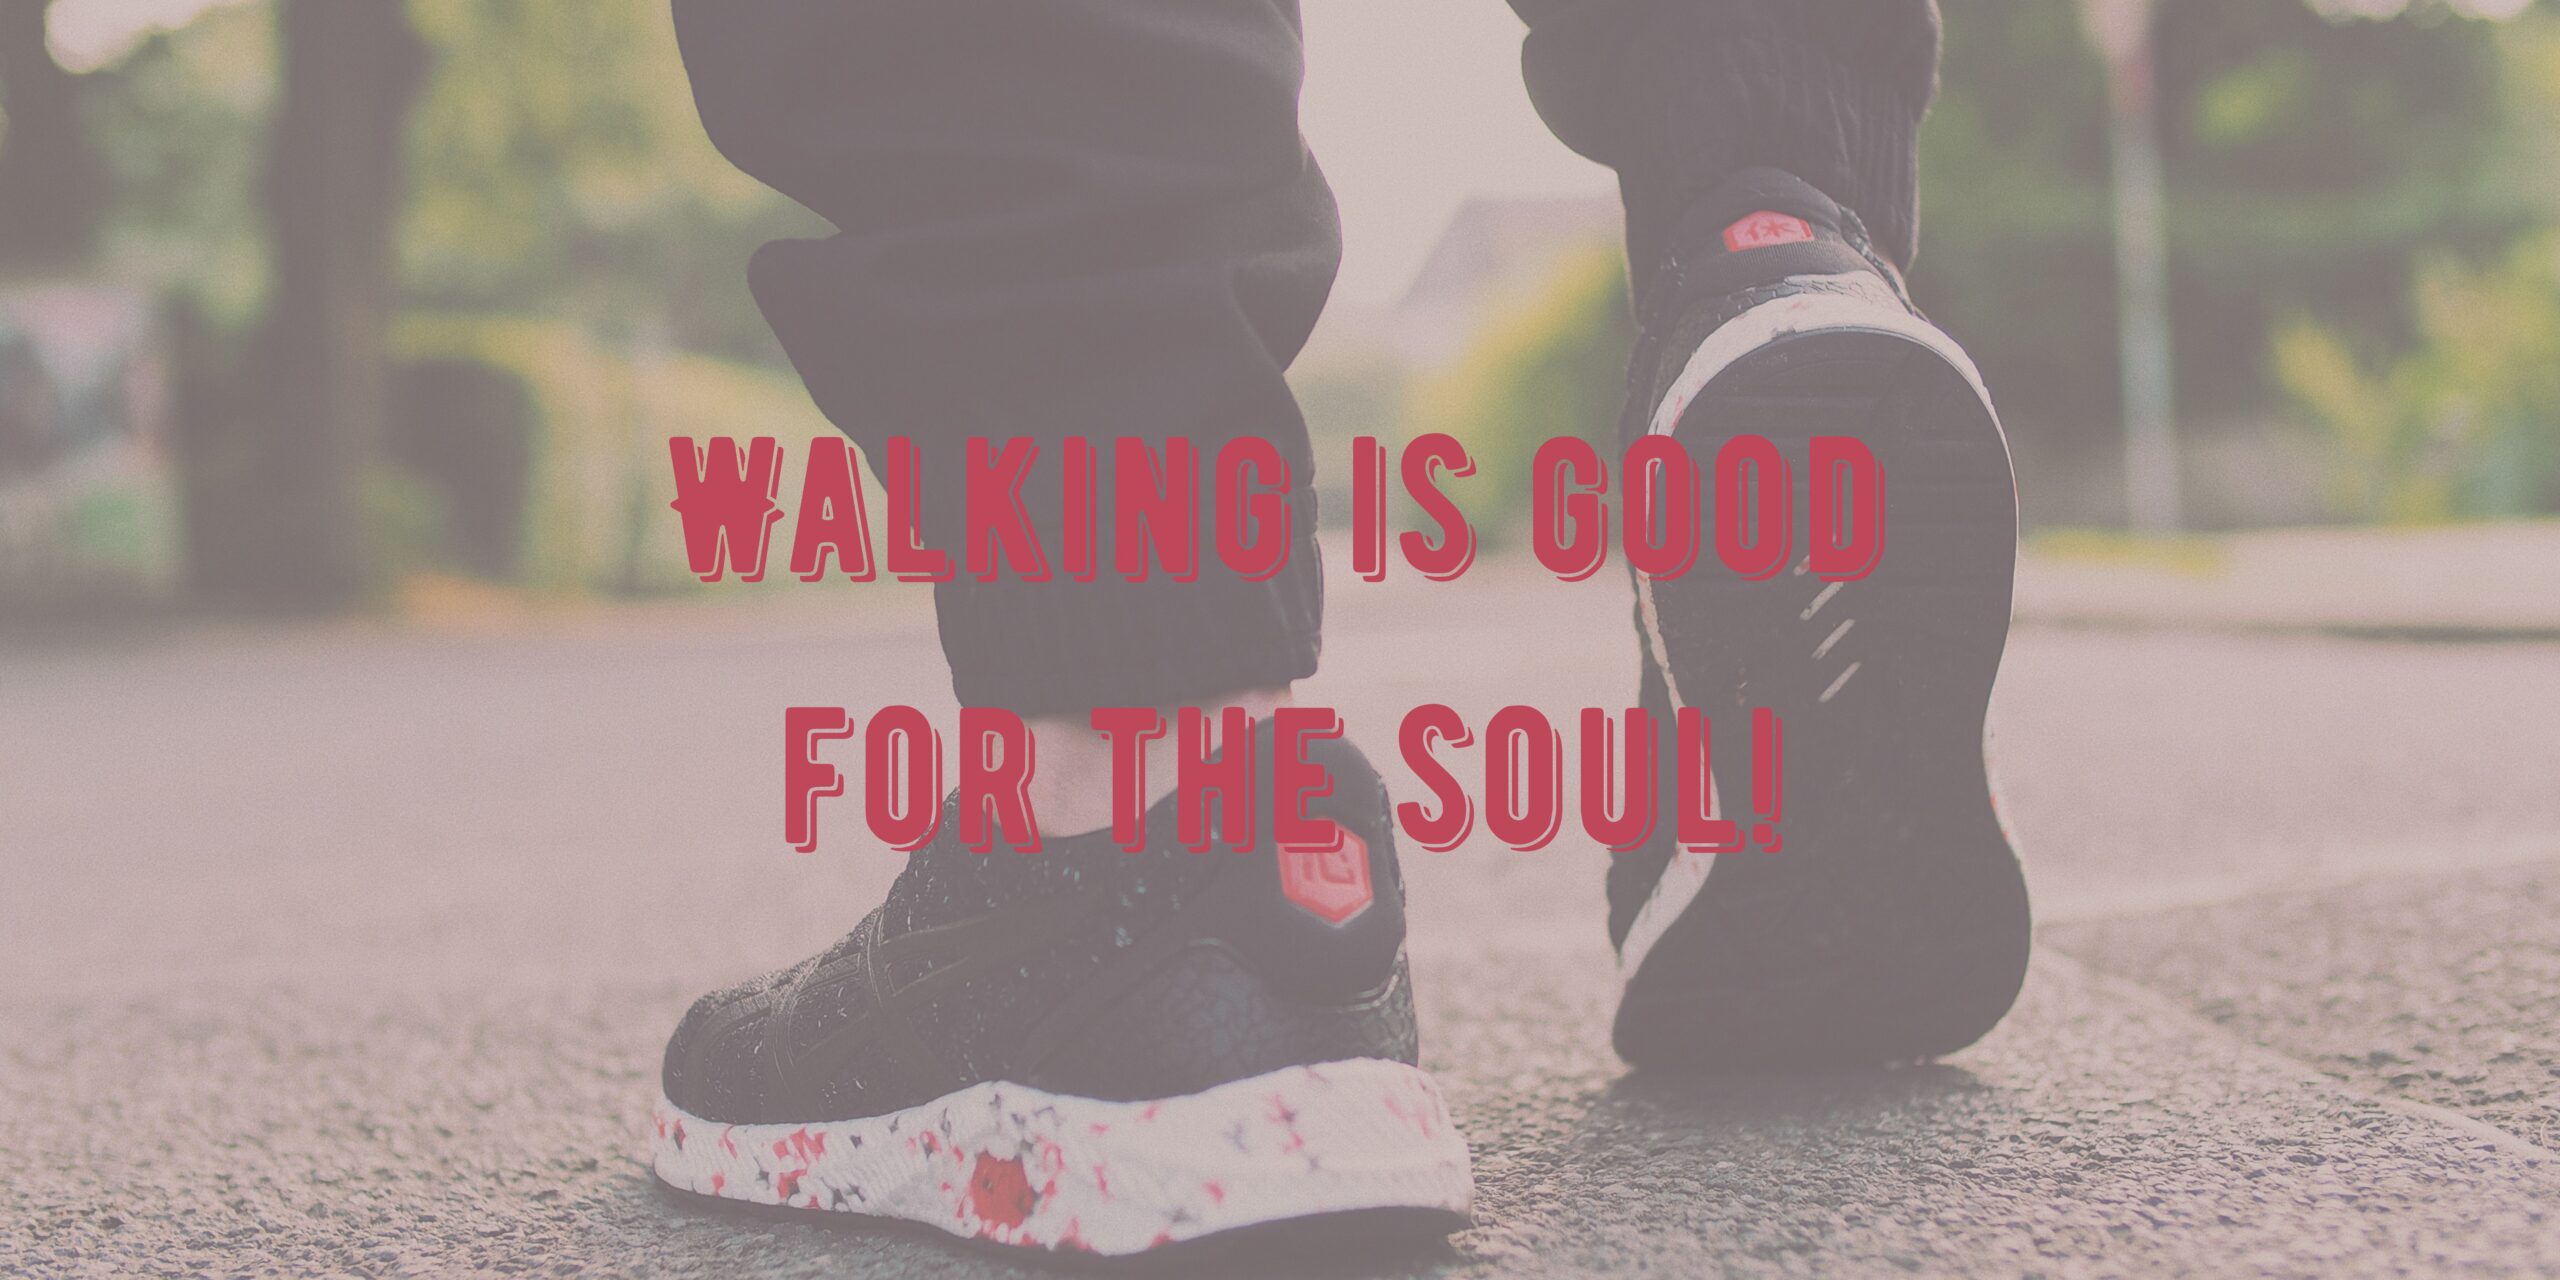 Walking is good for the soul!